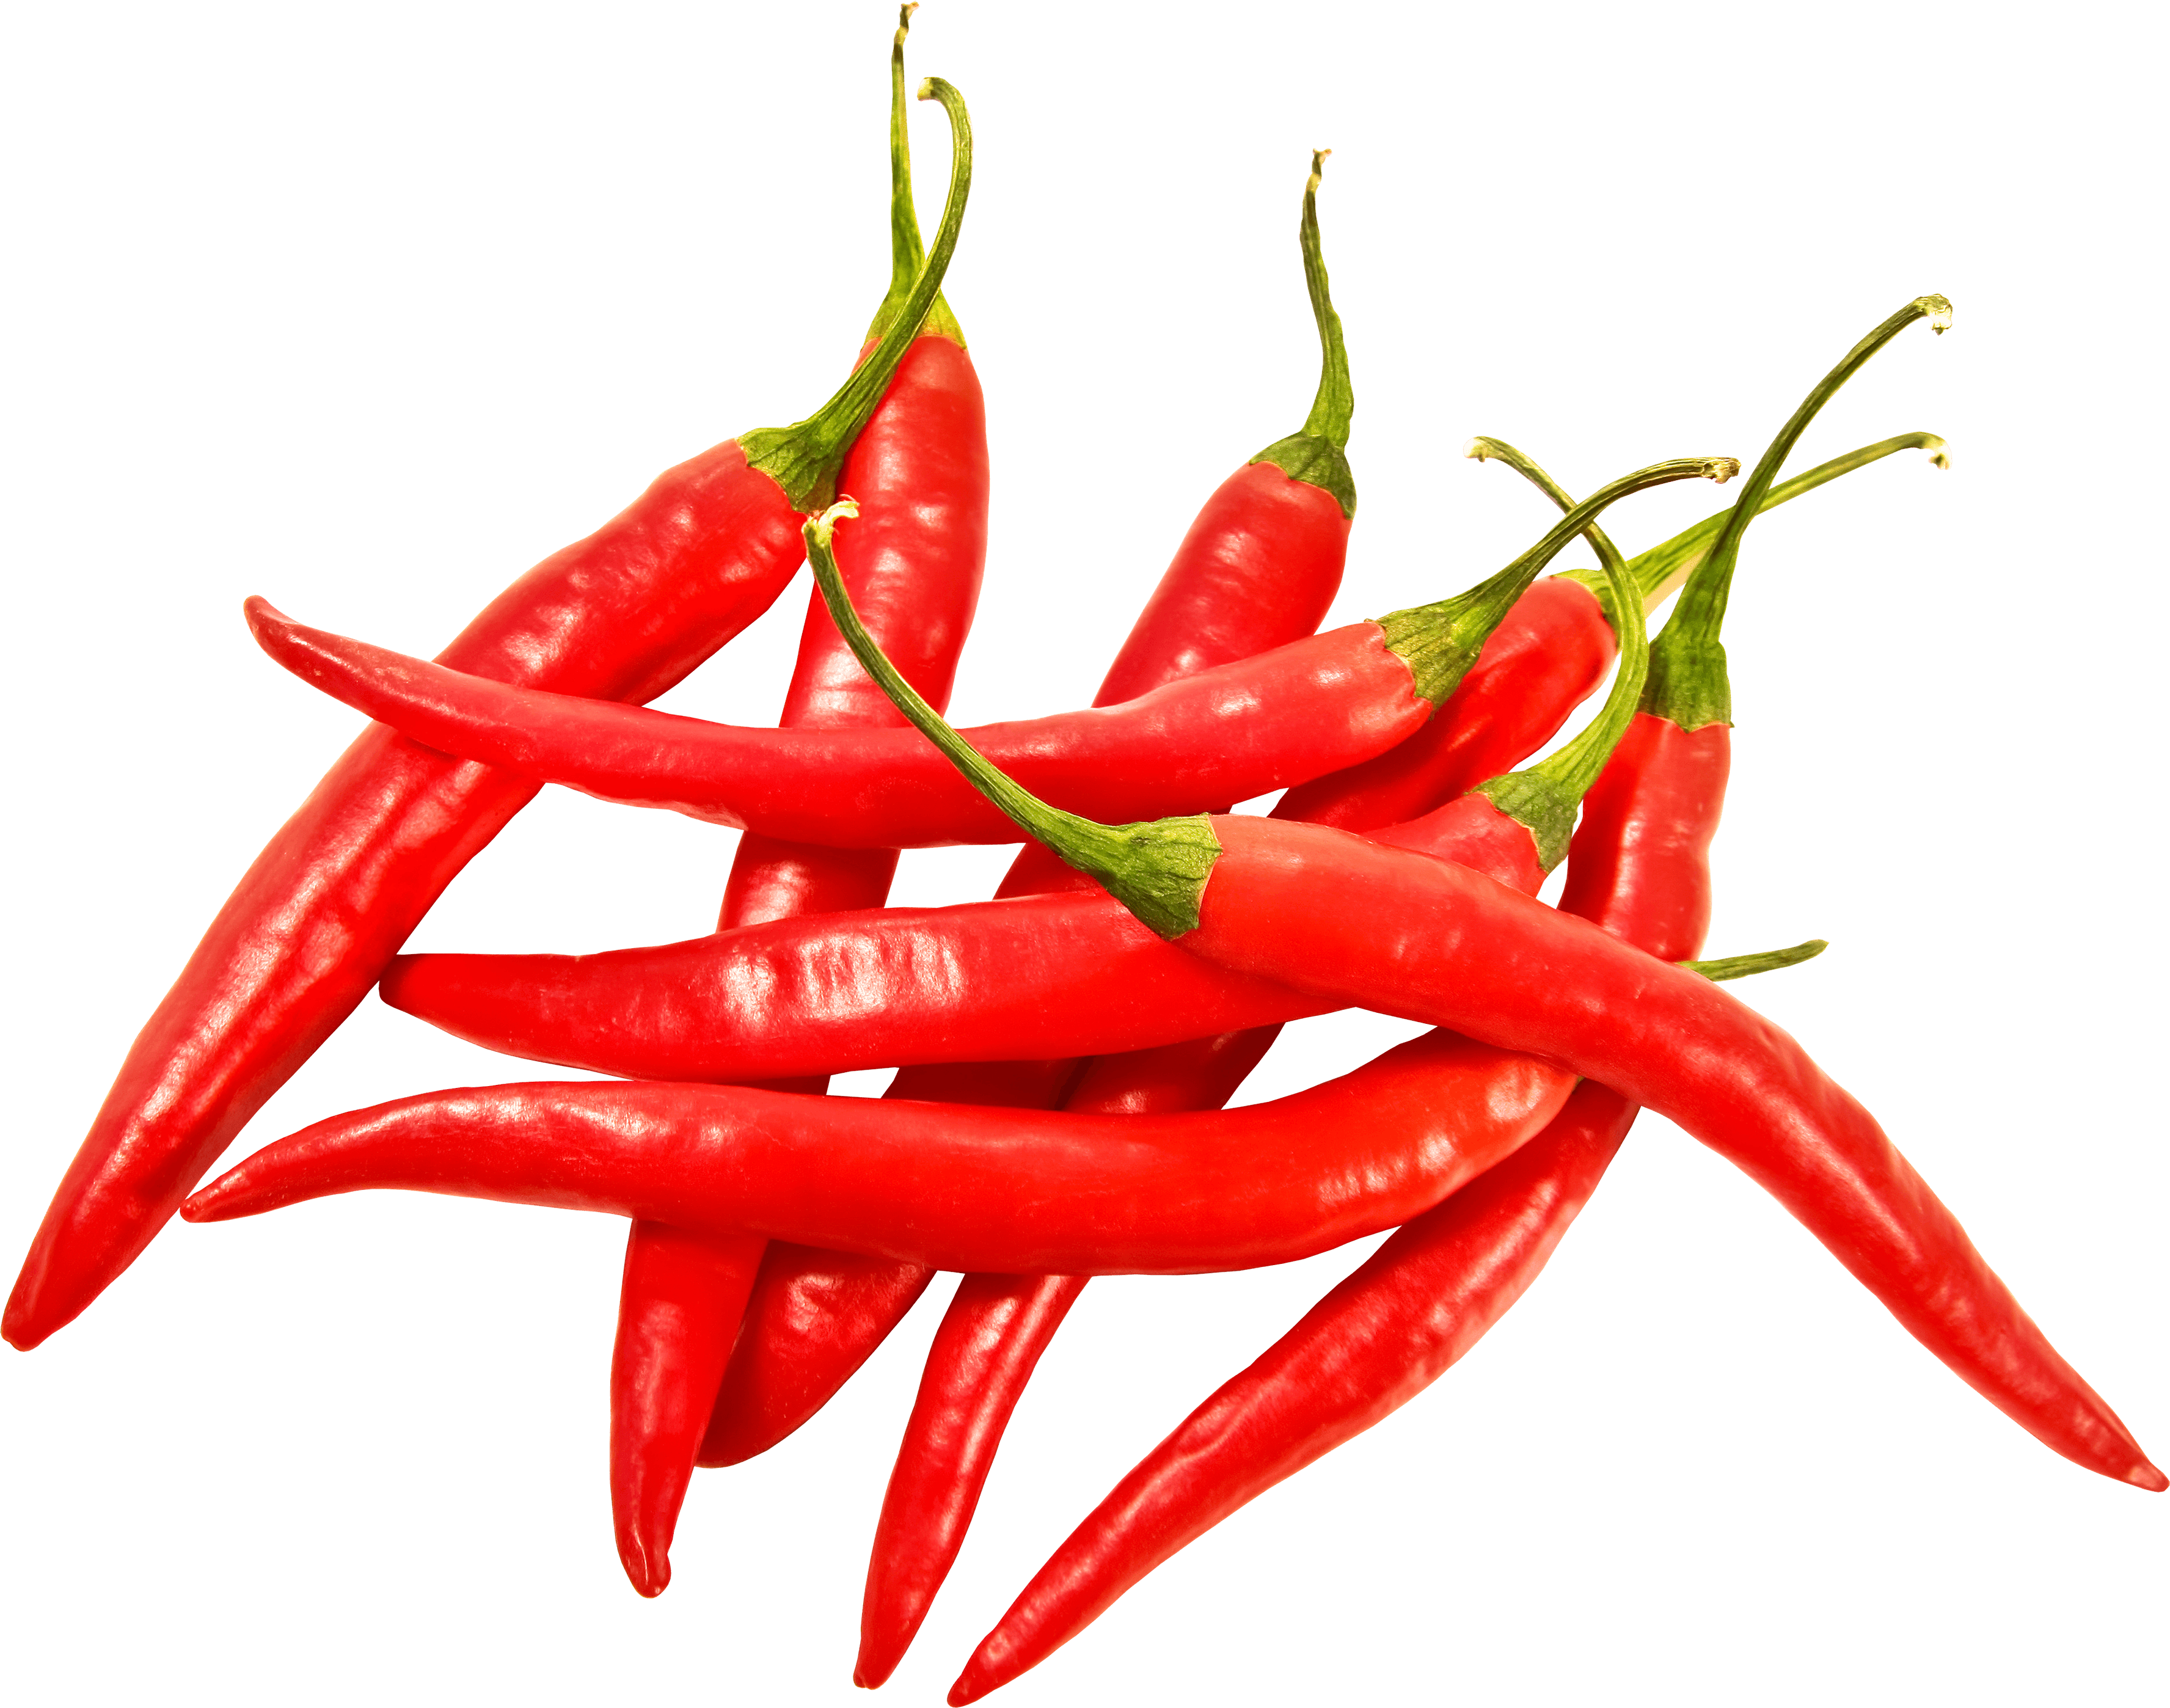 Download Red Chili Pepper Png Image HQ PNG Image | FreePNGImg